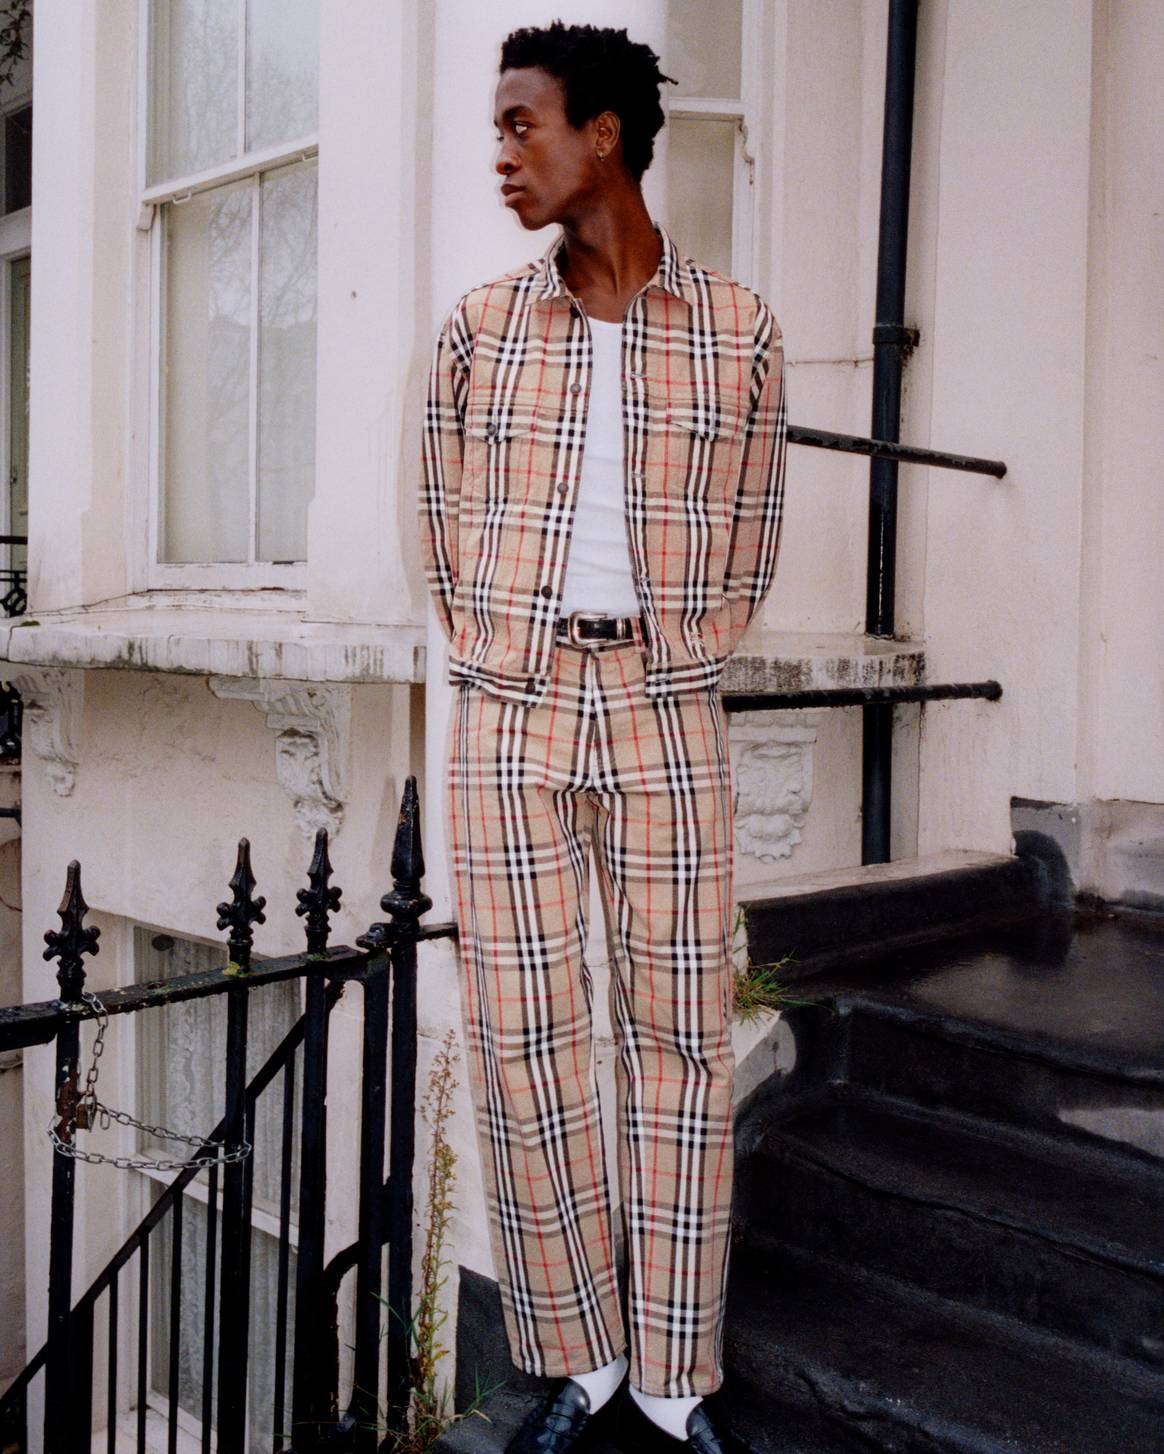 Image: Supreme/Burberry by Bolade Banjo